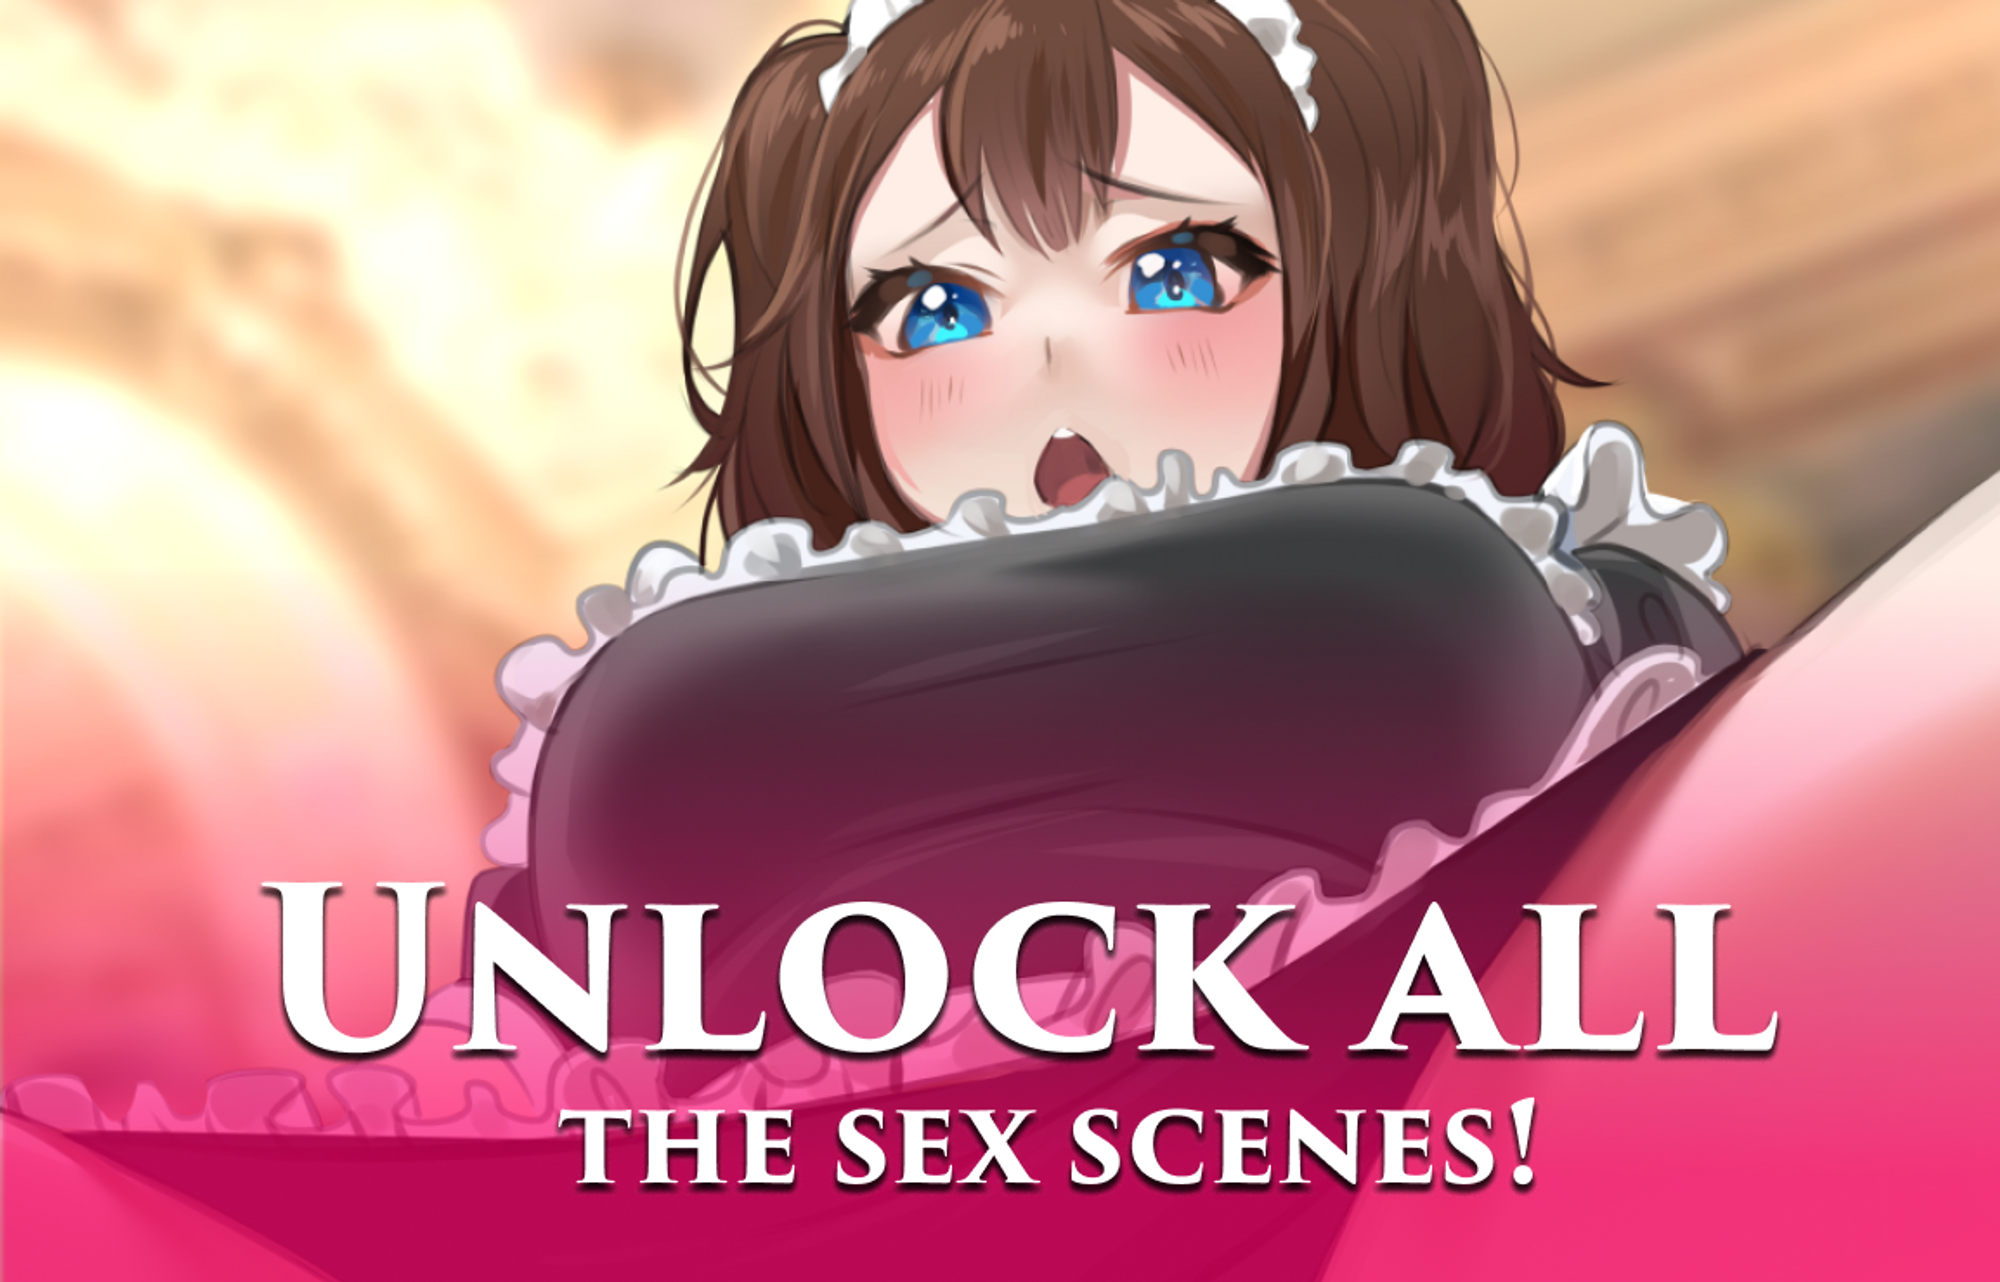 CHEAT CODES. Unlock all the sex scenes! - CHRONICLES OF ISABELLA by TOPHOUSE